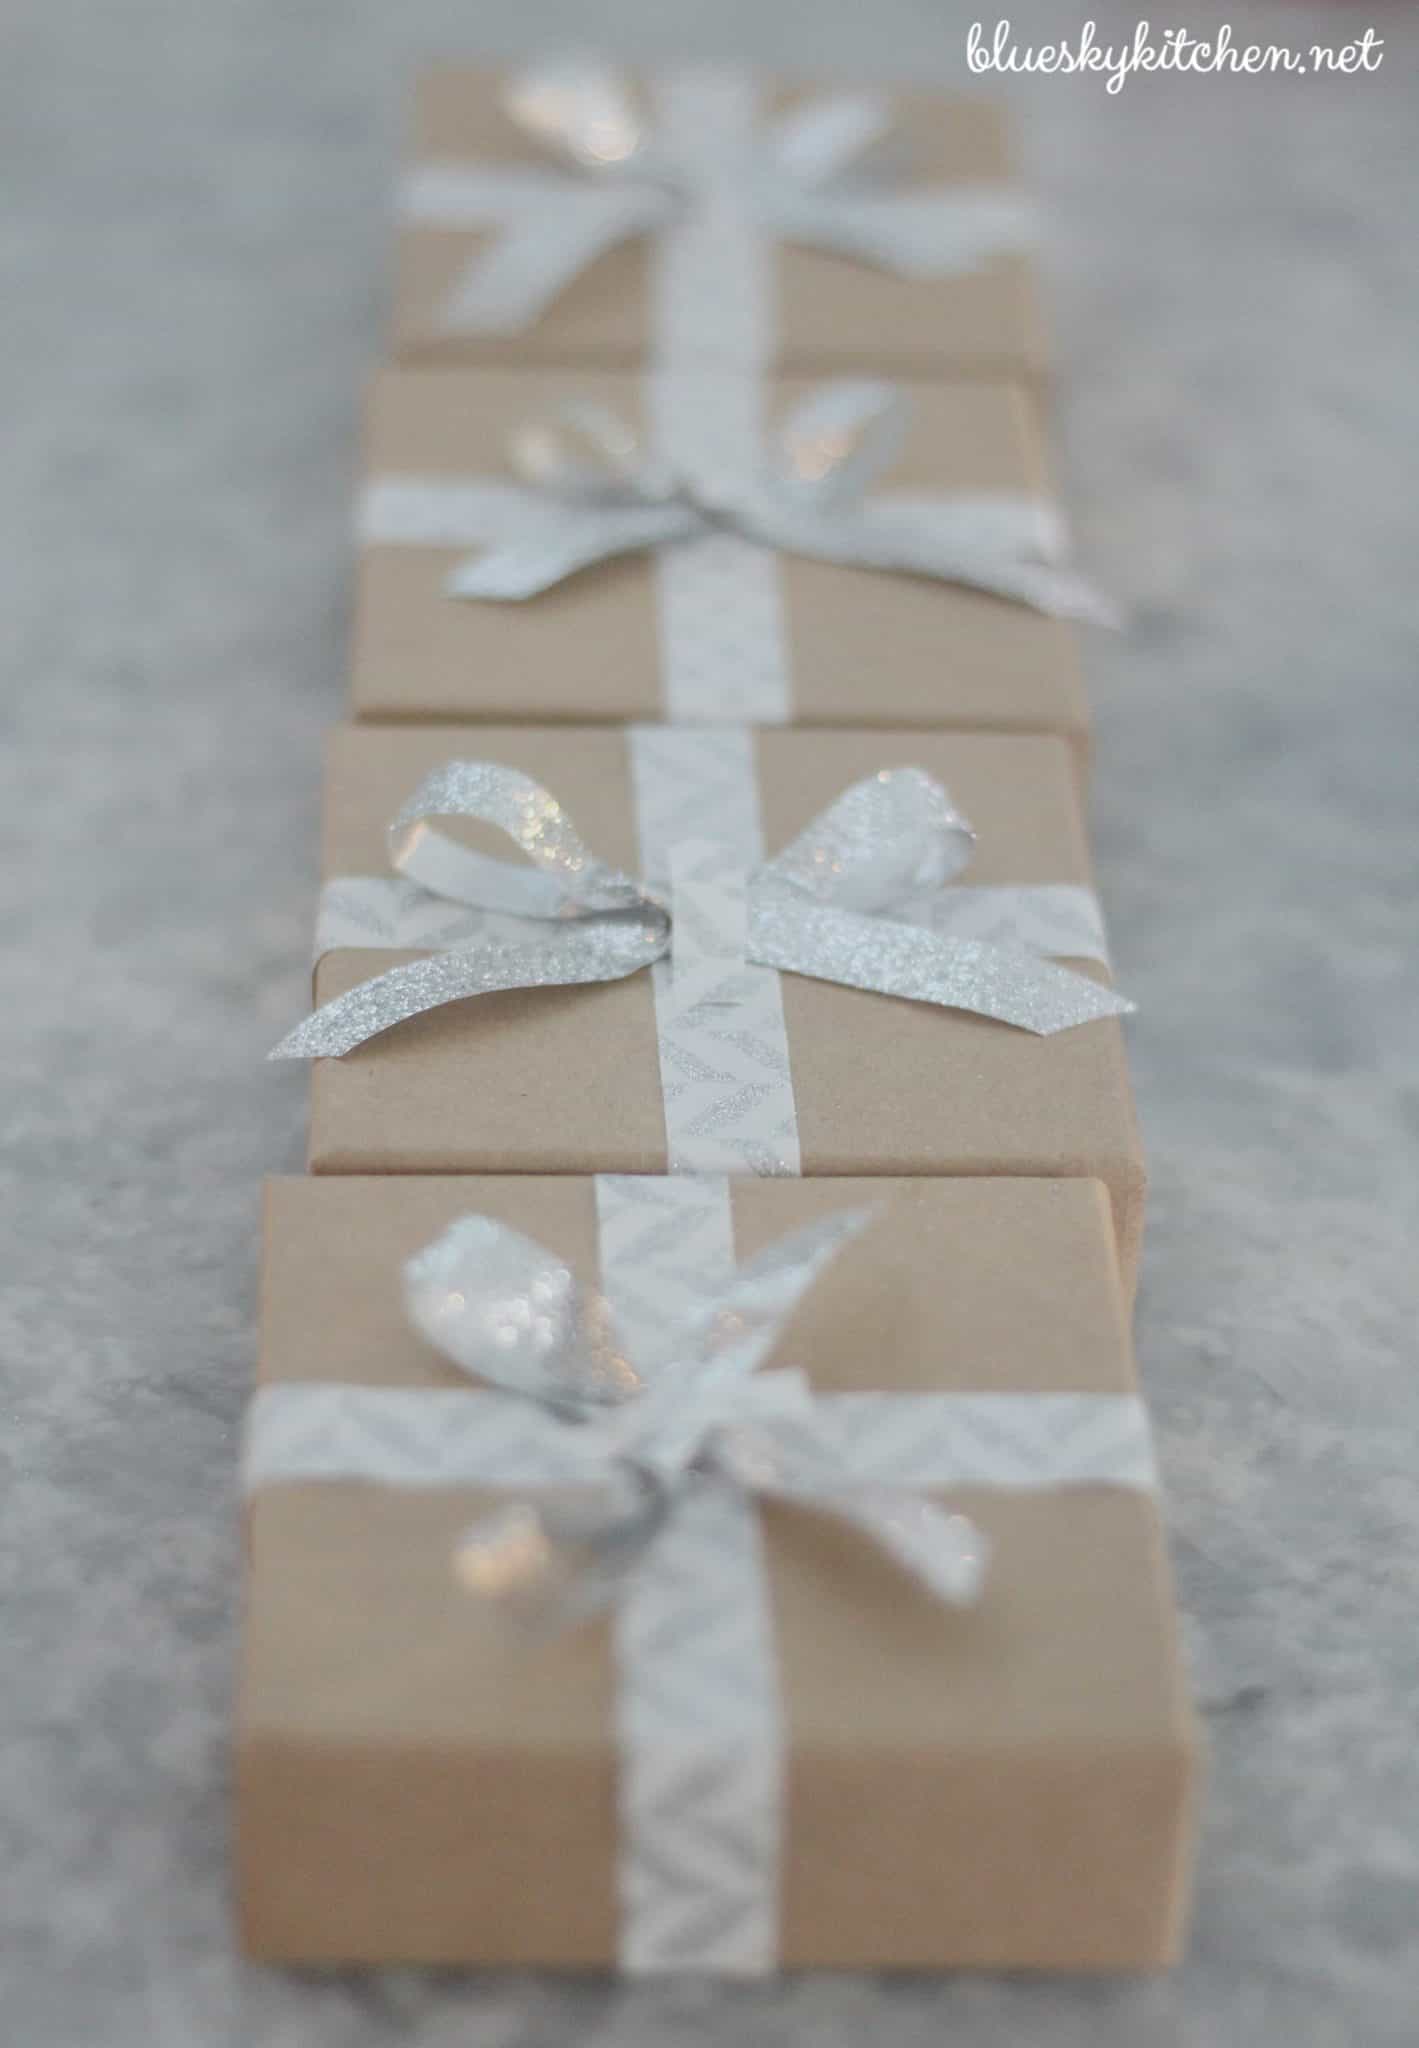 How to Make the Cutest, Glittery Gift Boxes